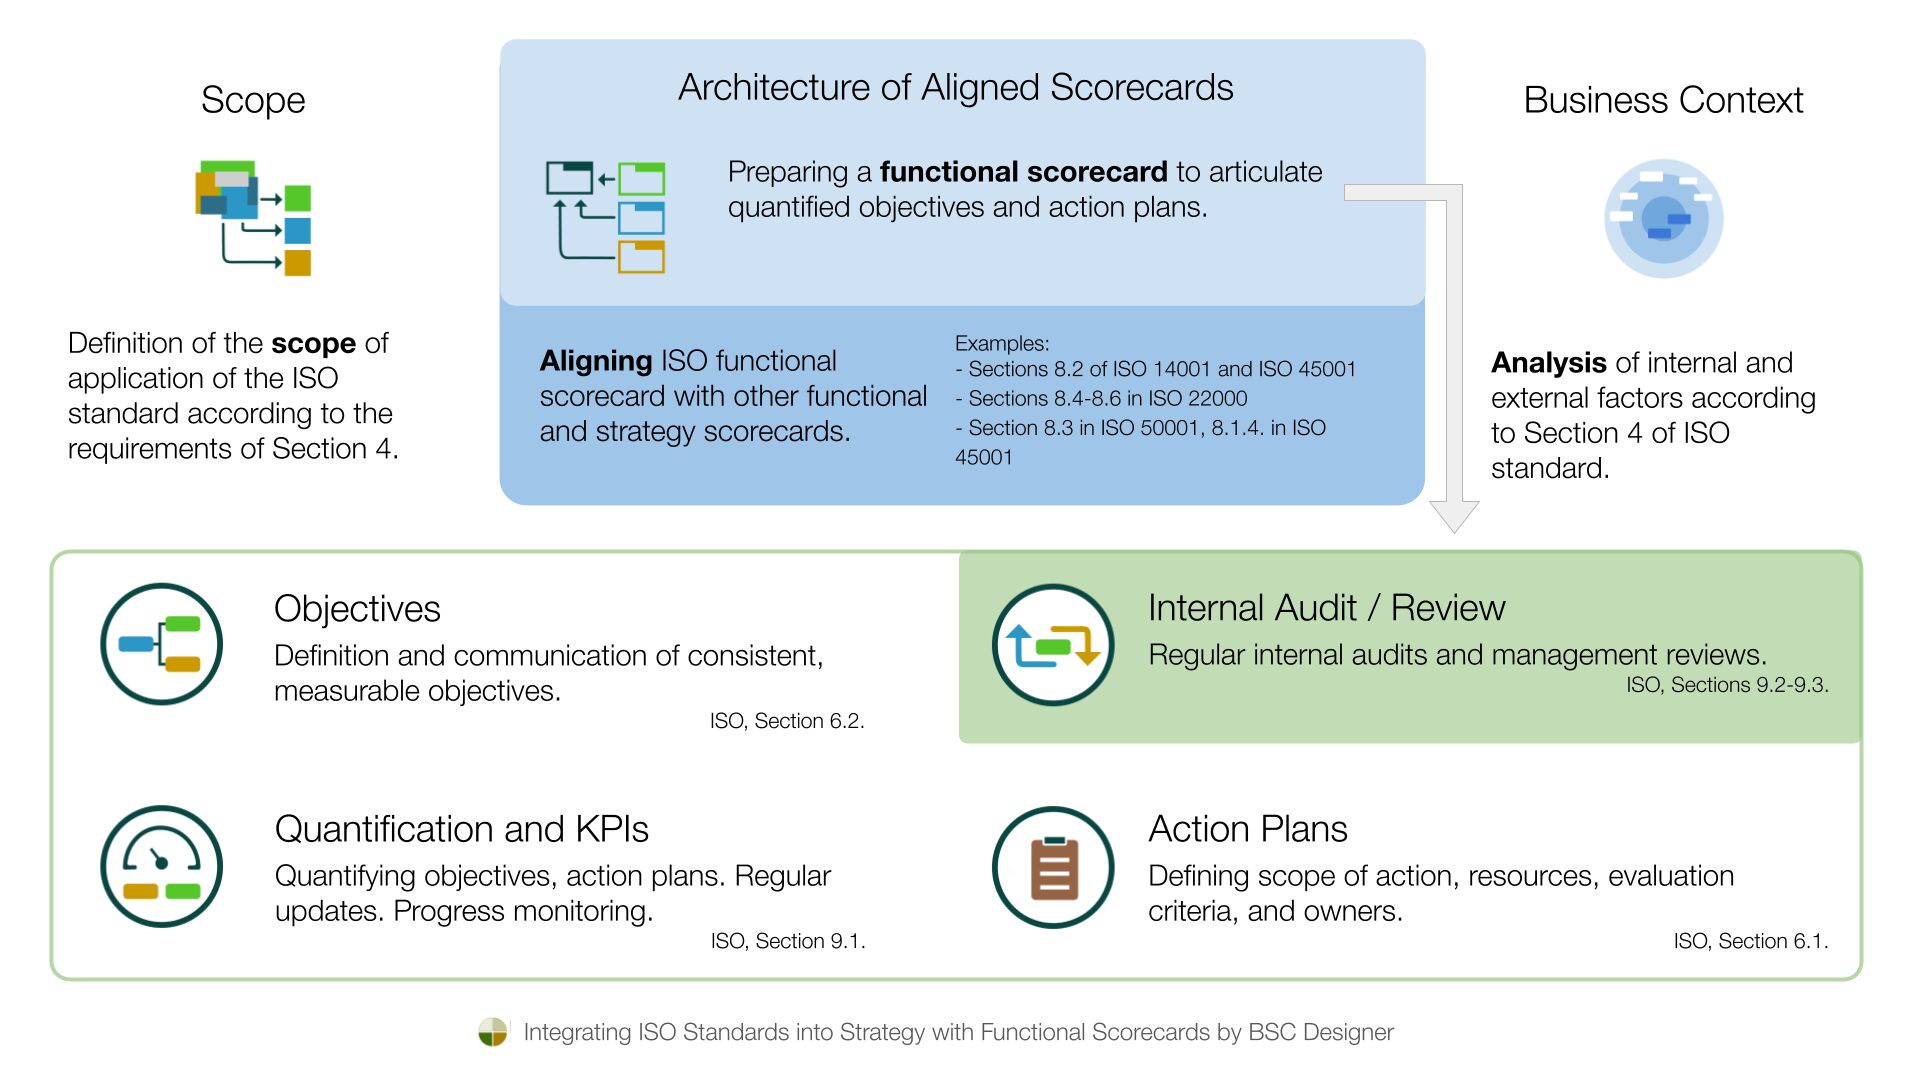 How to integrate ISO standards into strategy with functional scorecards.